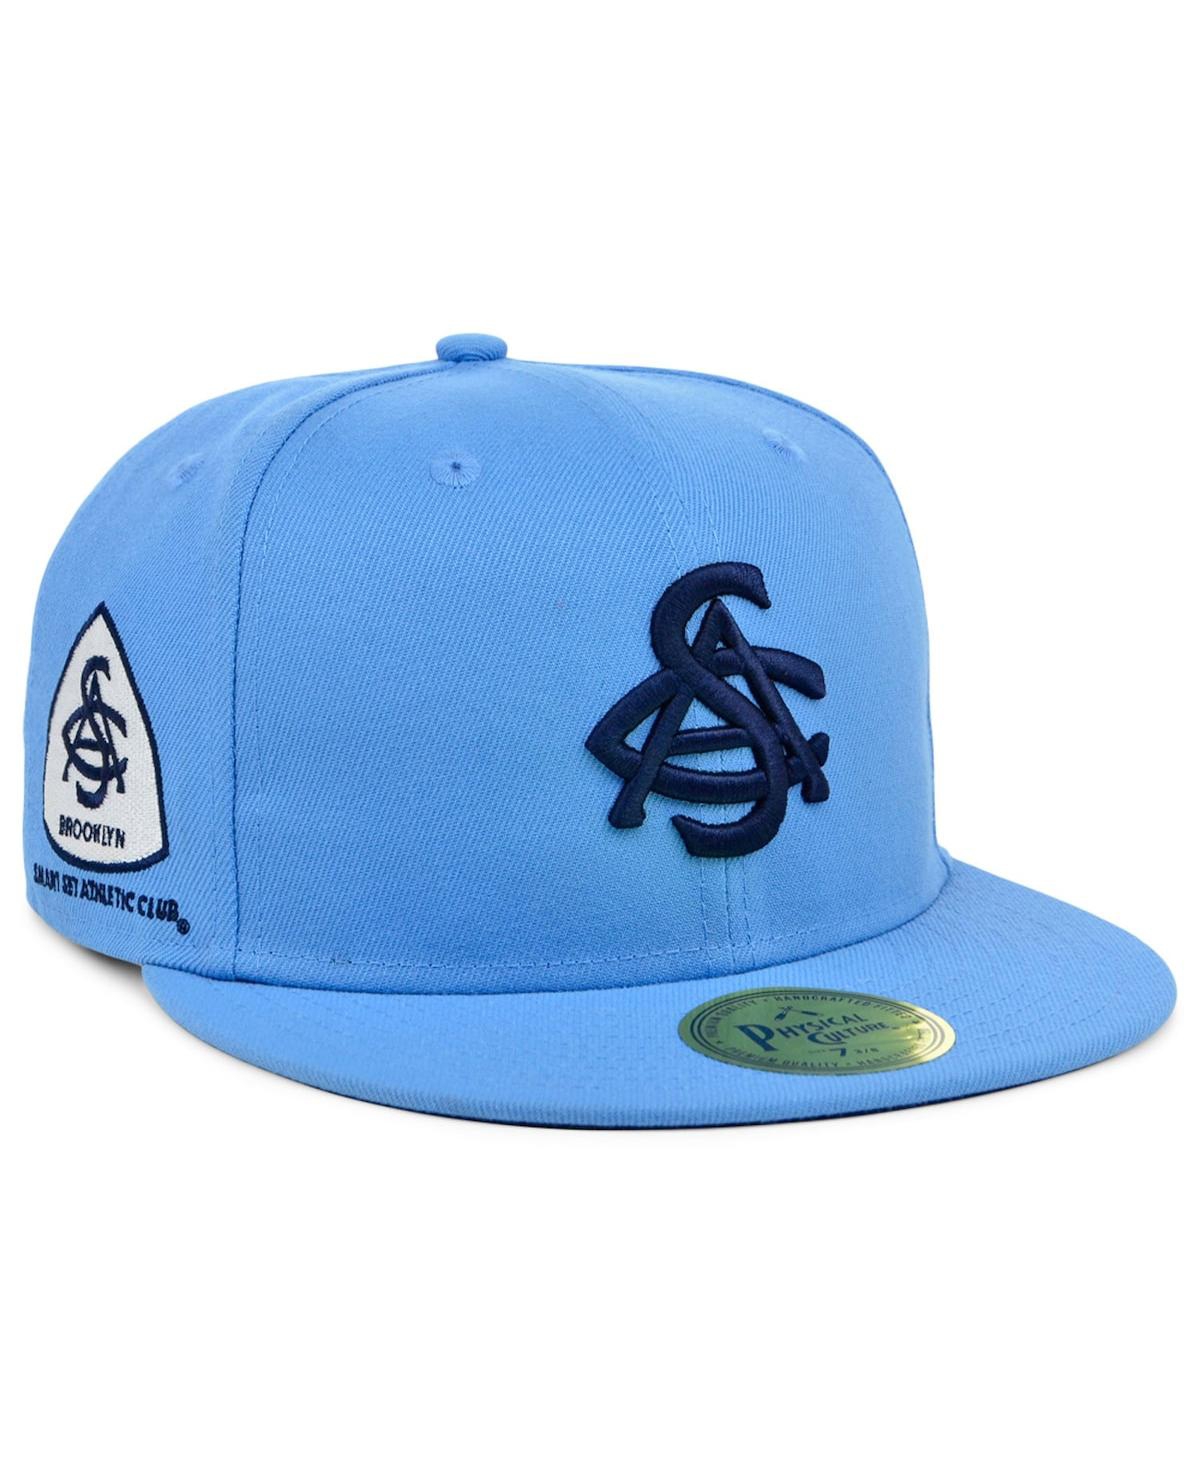 Shop Physical Culture Men's  Light Blue Smart Set Athletic Club Of Brooklyn Black Fives Fitted Hat